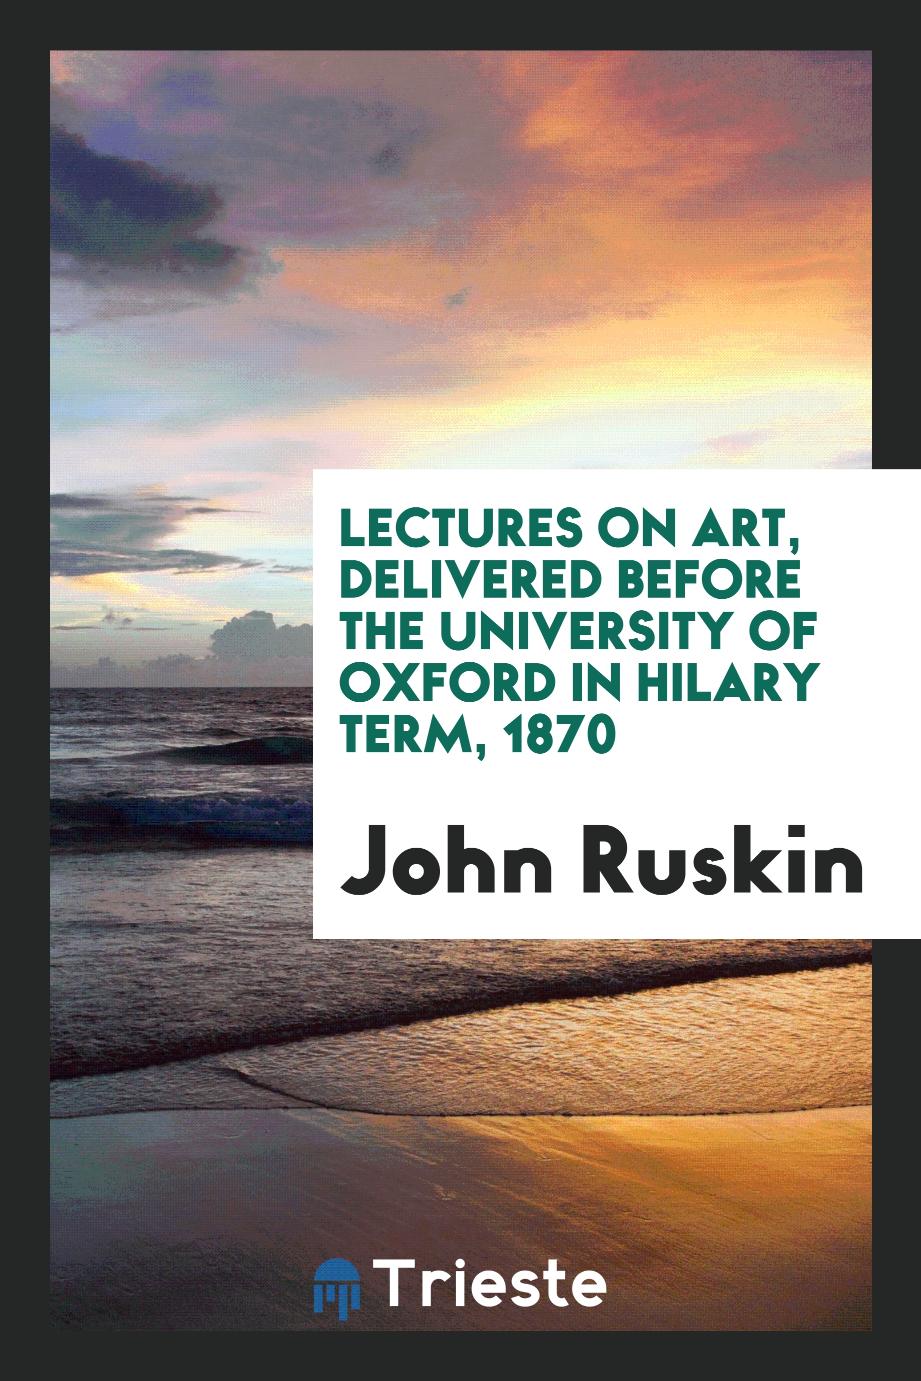 Lectures on Art, Delivered before the University of Oxford in Hilary Term, 1870